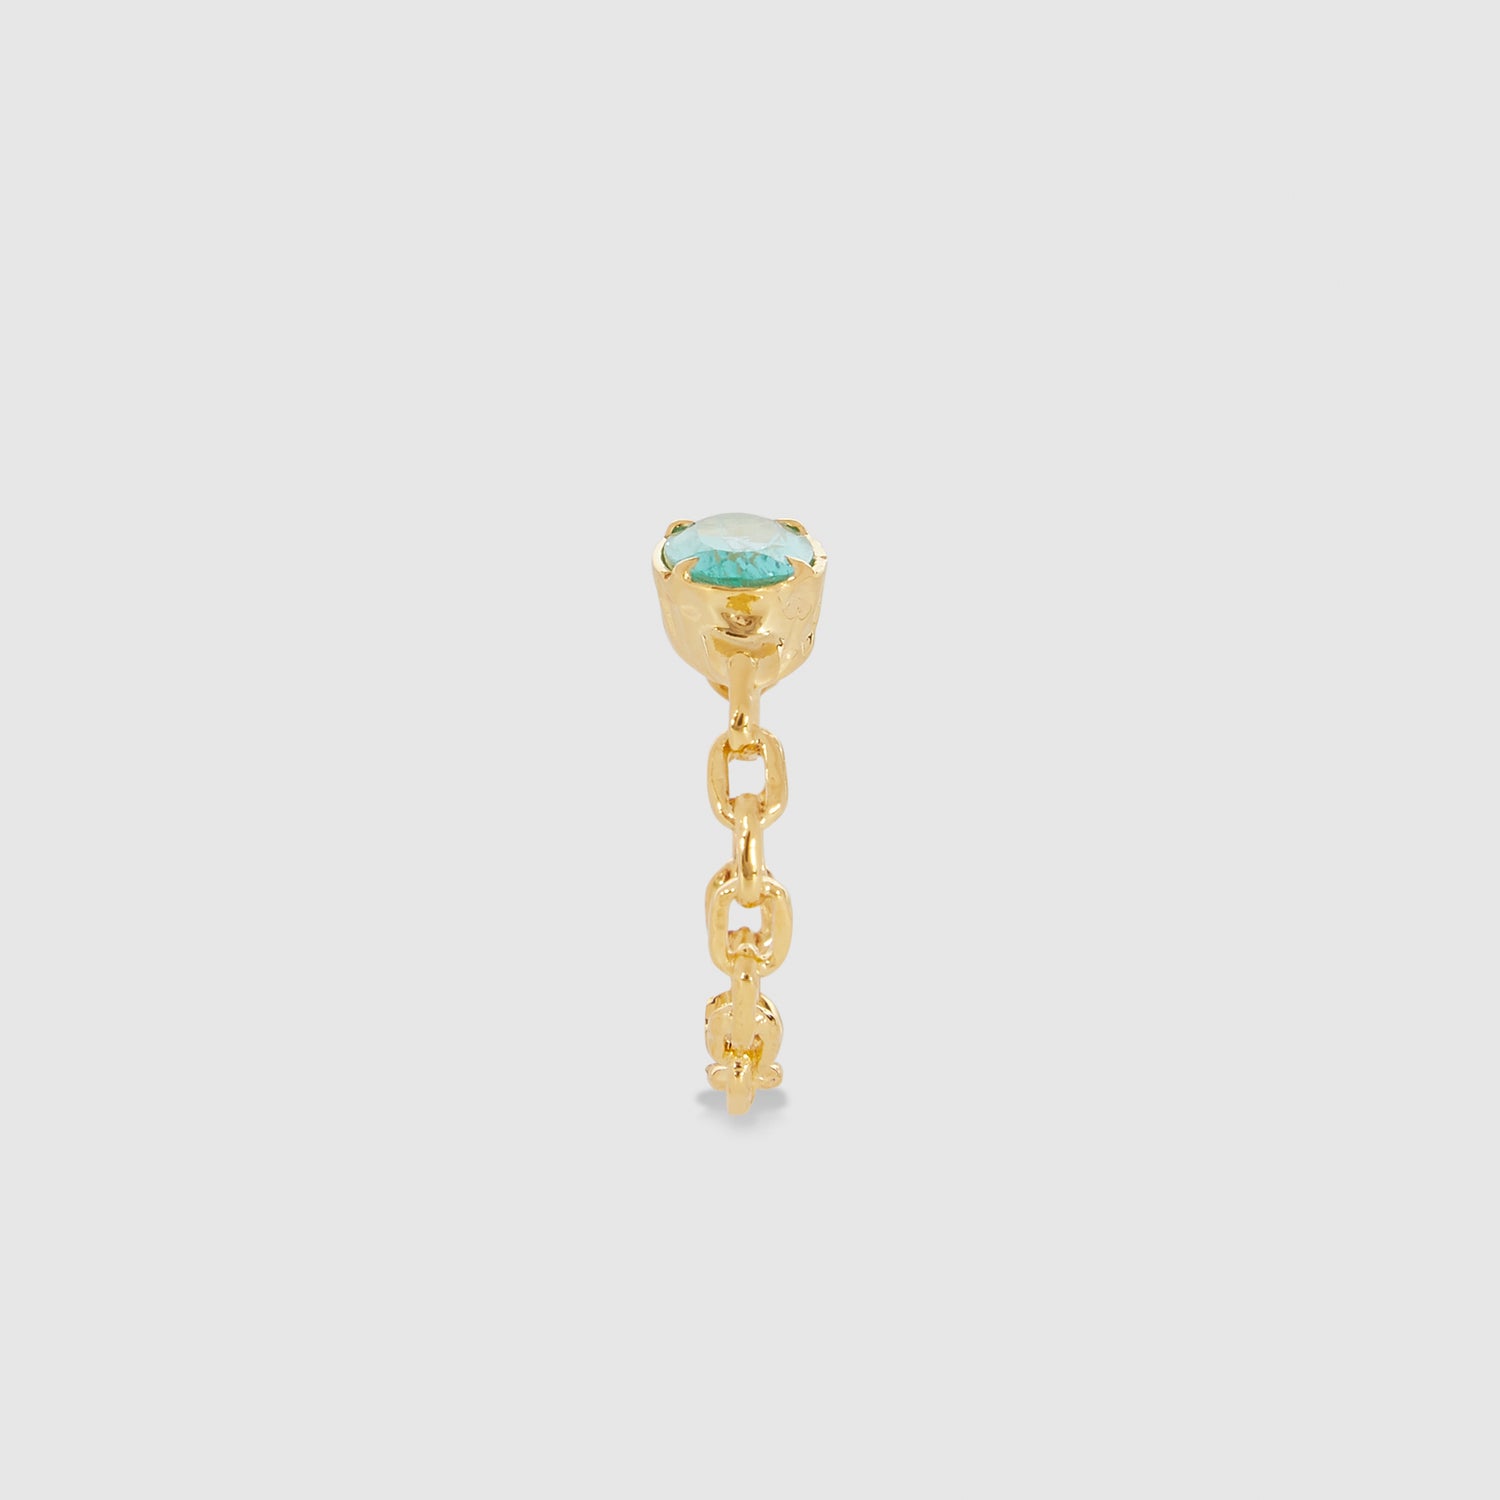 Mint Chain Ring